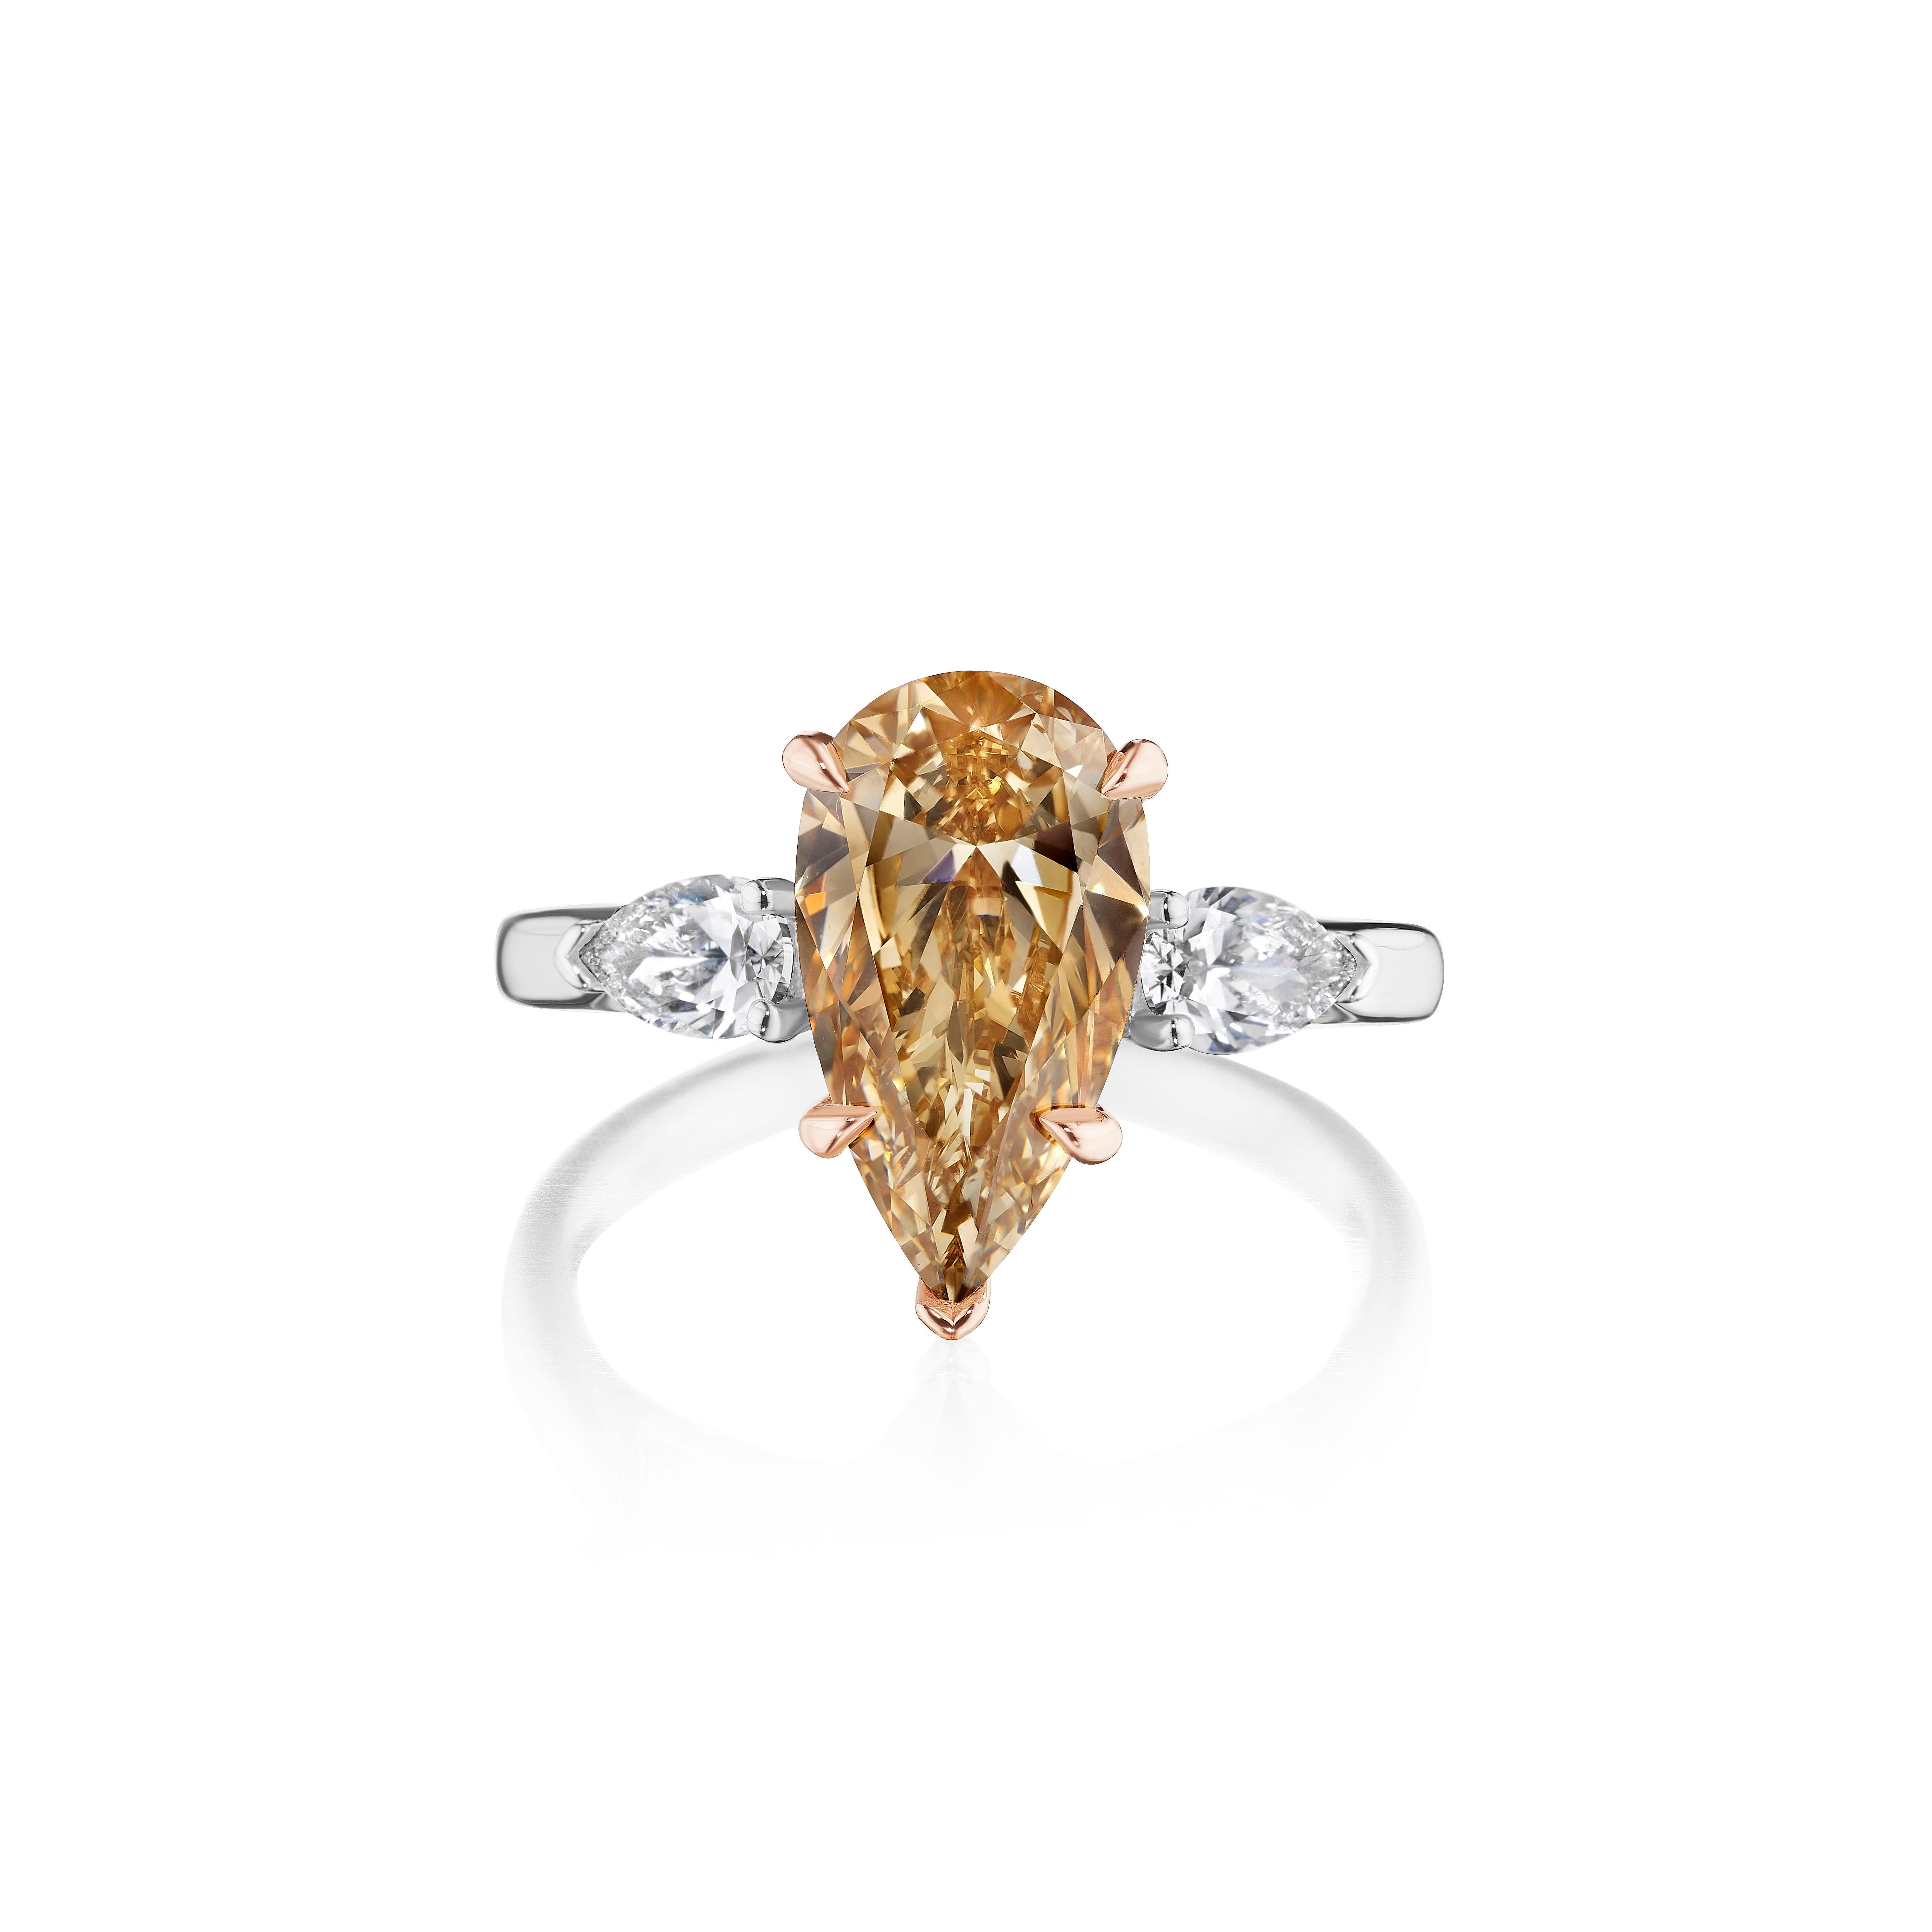 •	Platinum & 18KT Two Tone
•	2.98 Carats
•	Size: 6.5

•	Number of Pear Shape Diamonds: 1
•	Carat Weight: 2.51ctw
•	Color: Fancy Brown Yellow
•	Clarity: SI1
•	Stone Measurements: 13.01 x 7.20mm
•	GIA: 5221930382

•	Number of Pear Shape Diamonds: